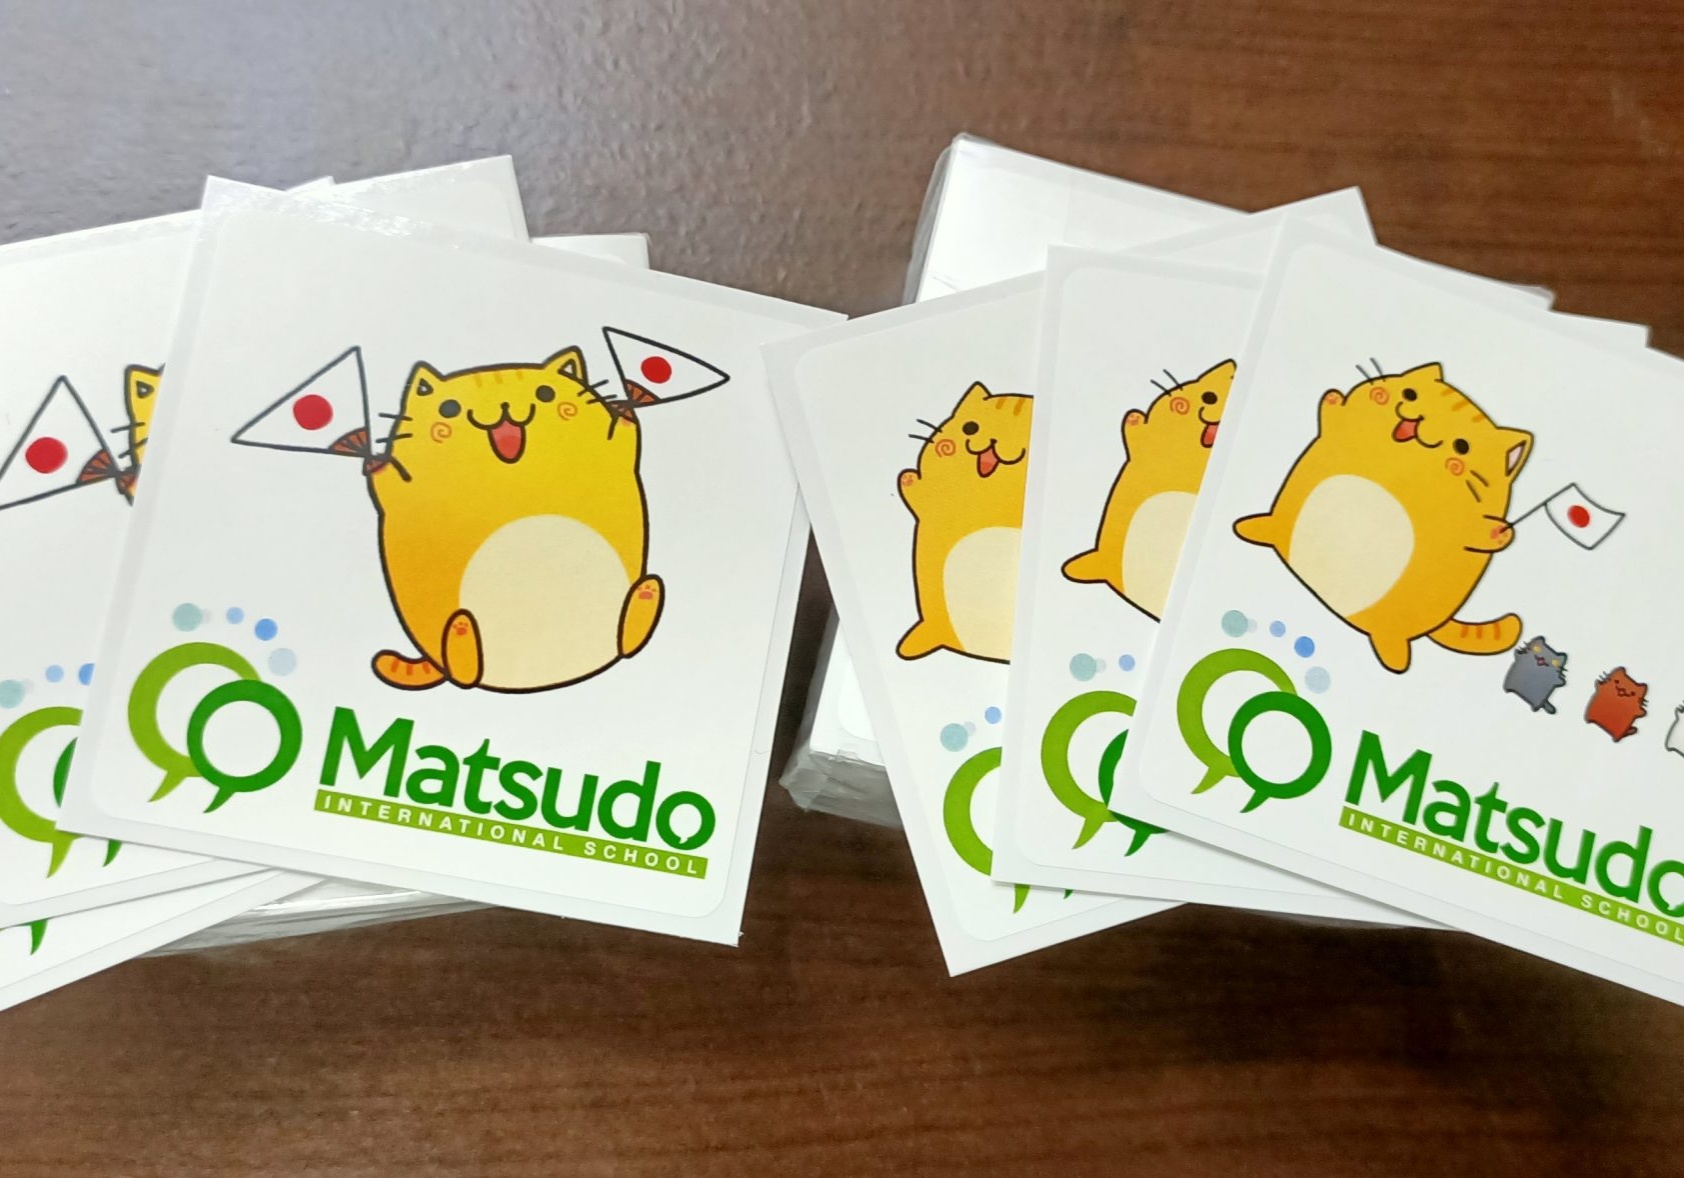 Mirrorkote stickers, Square (Rounded corners) with Individual cutting for Matsudo International School